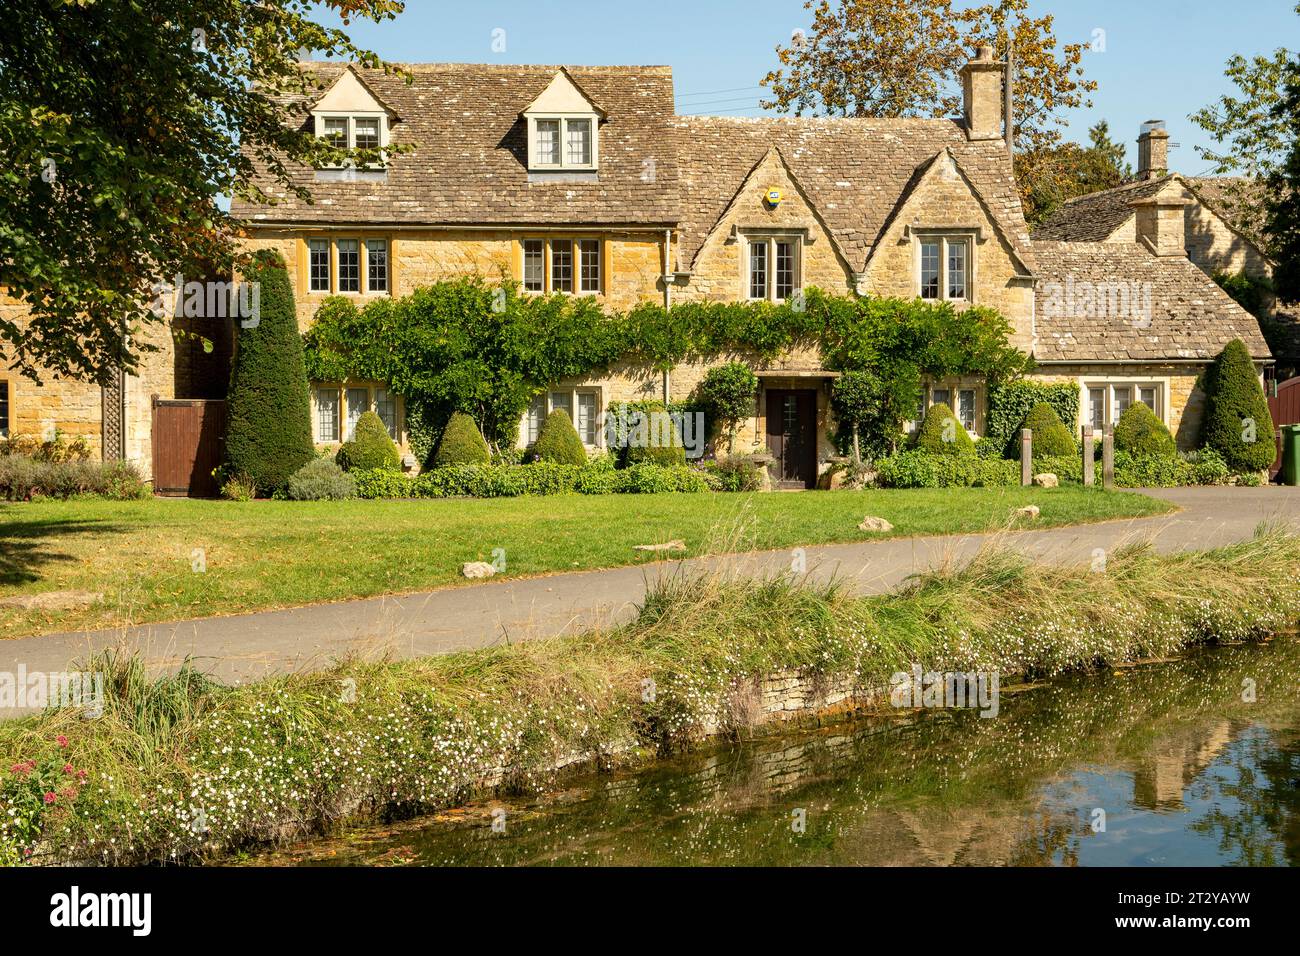 Cotswold Houses, Lower Slaughter, Gloucestershire, Angleterre Banque D'Images